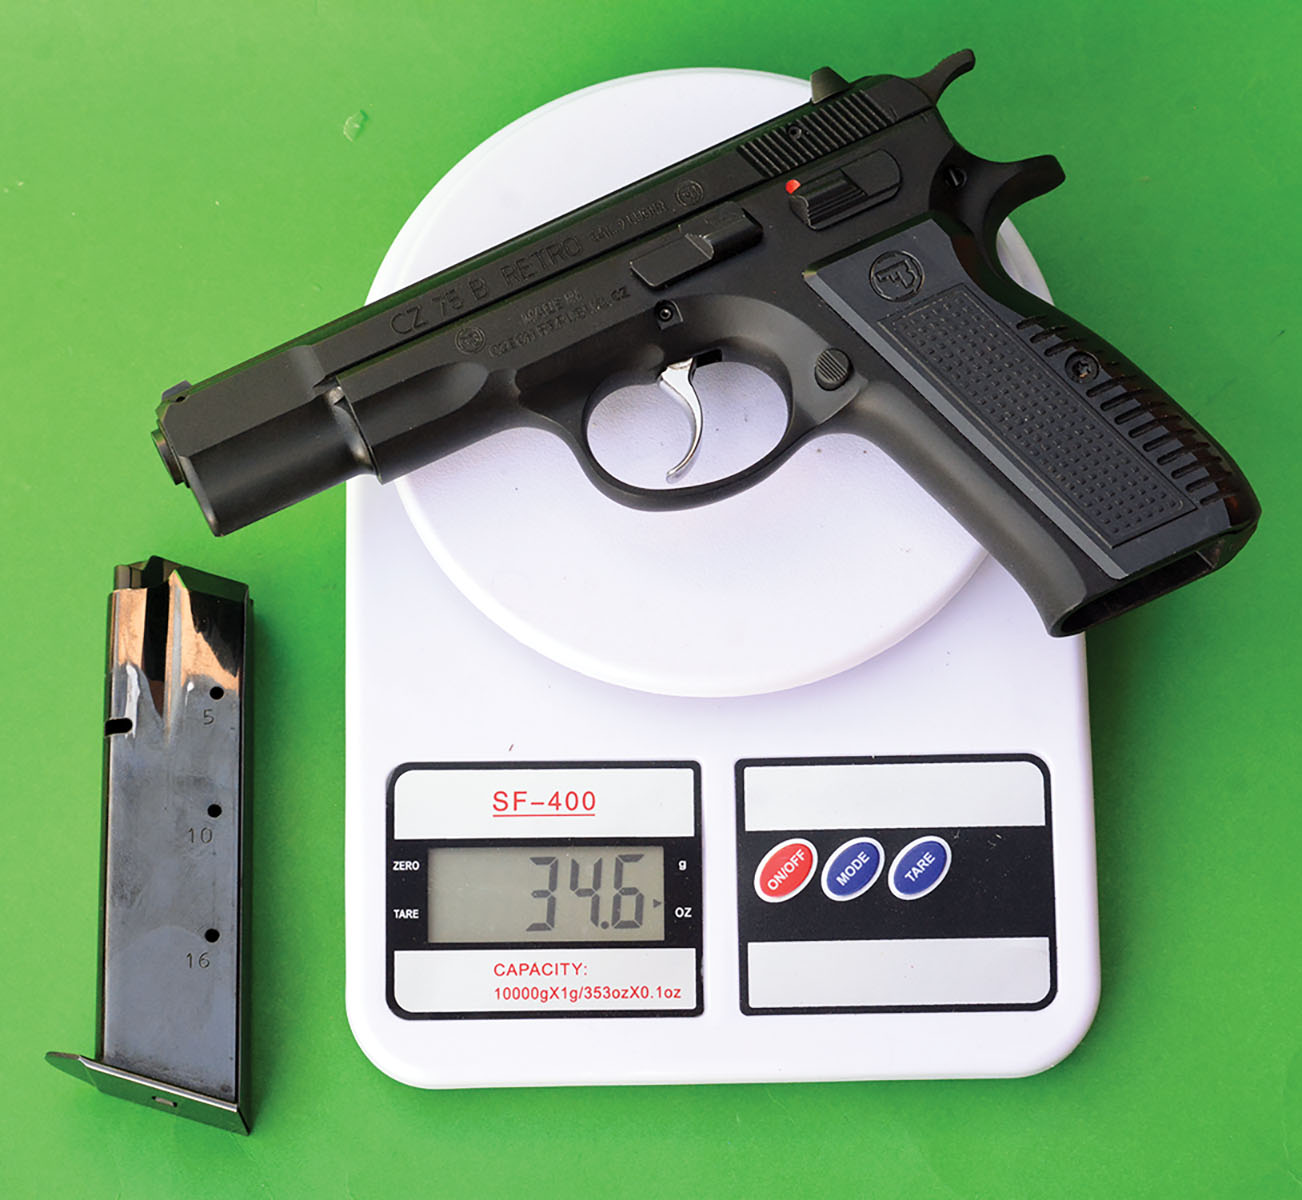 Without the magazine installed, the CZ-USA 75 B RETRO weighs 34.6 ounces and is all steel.